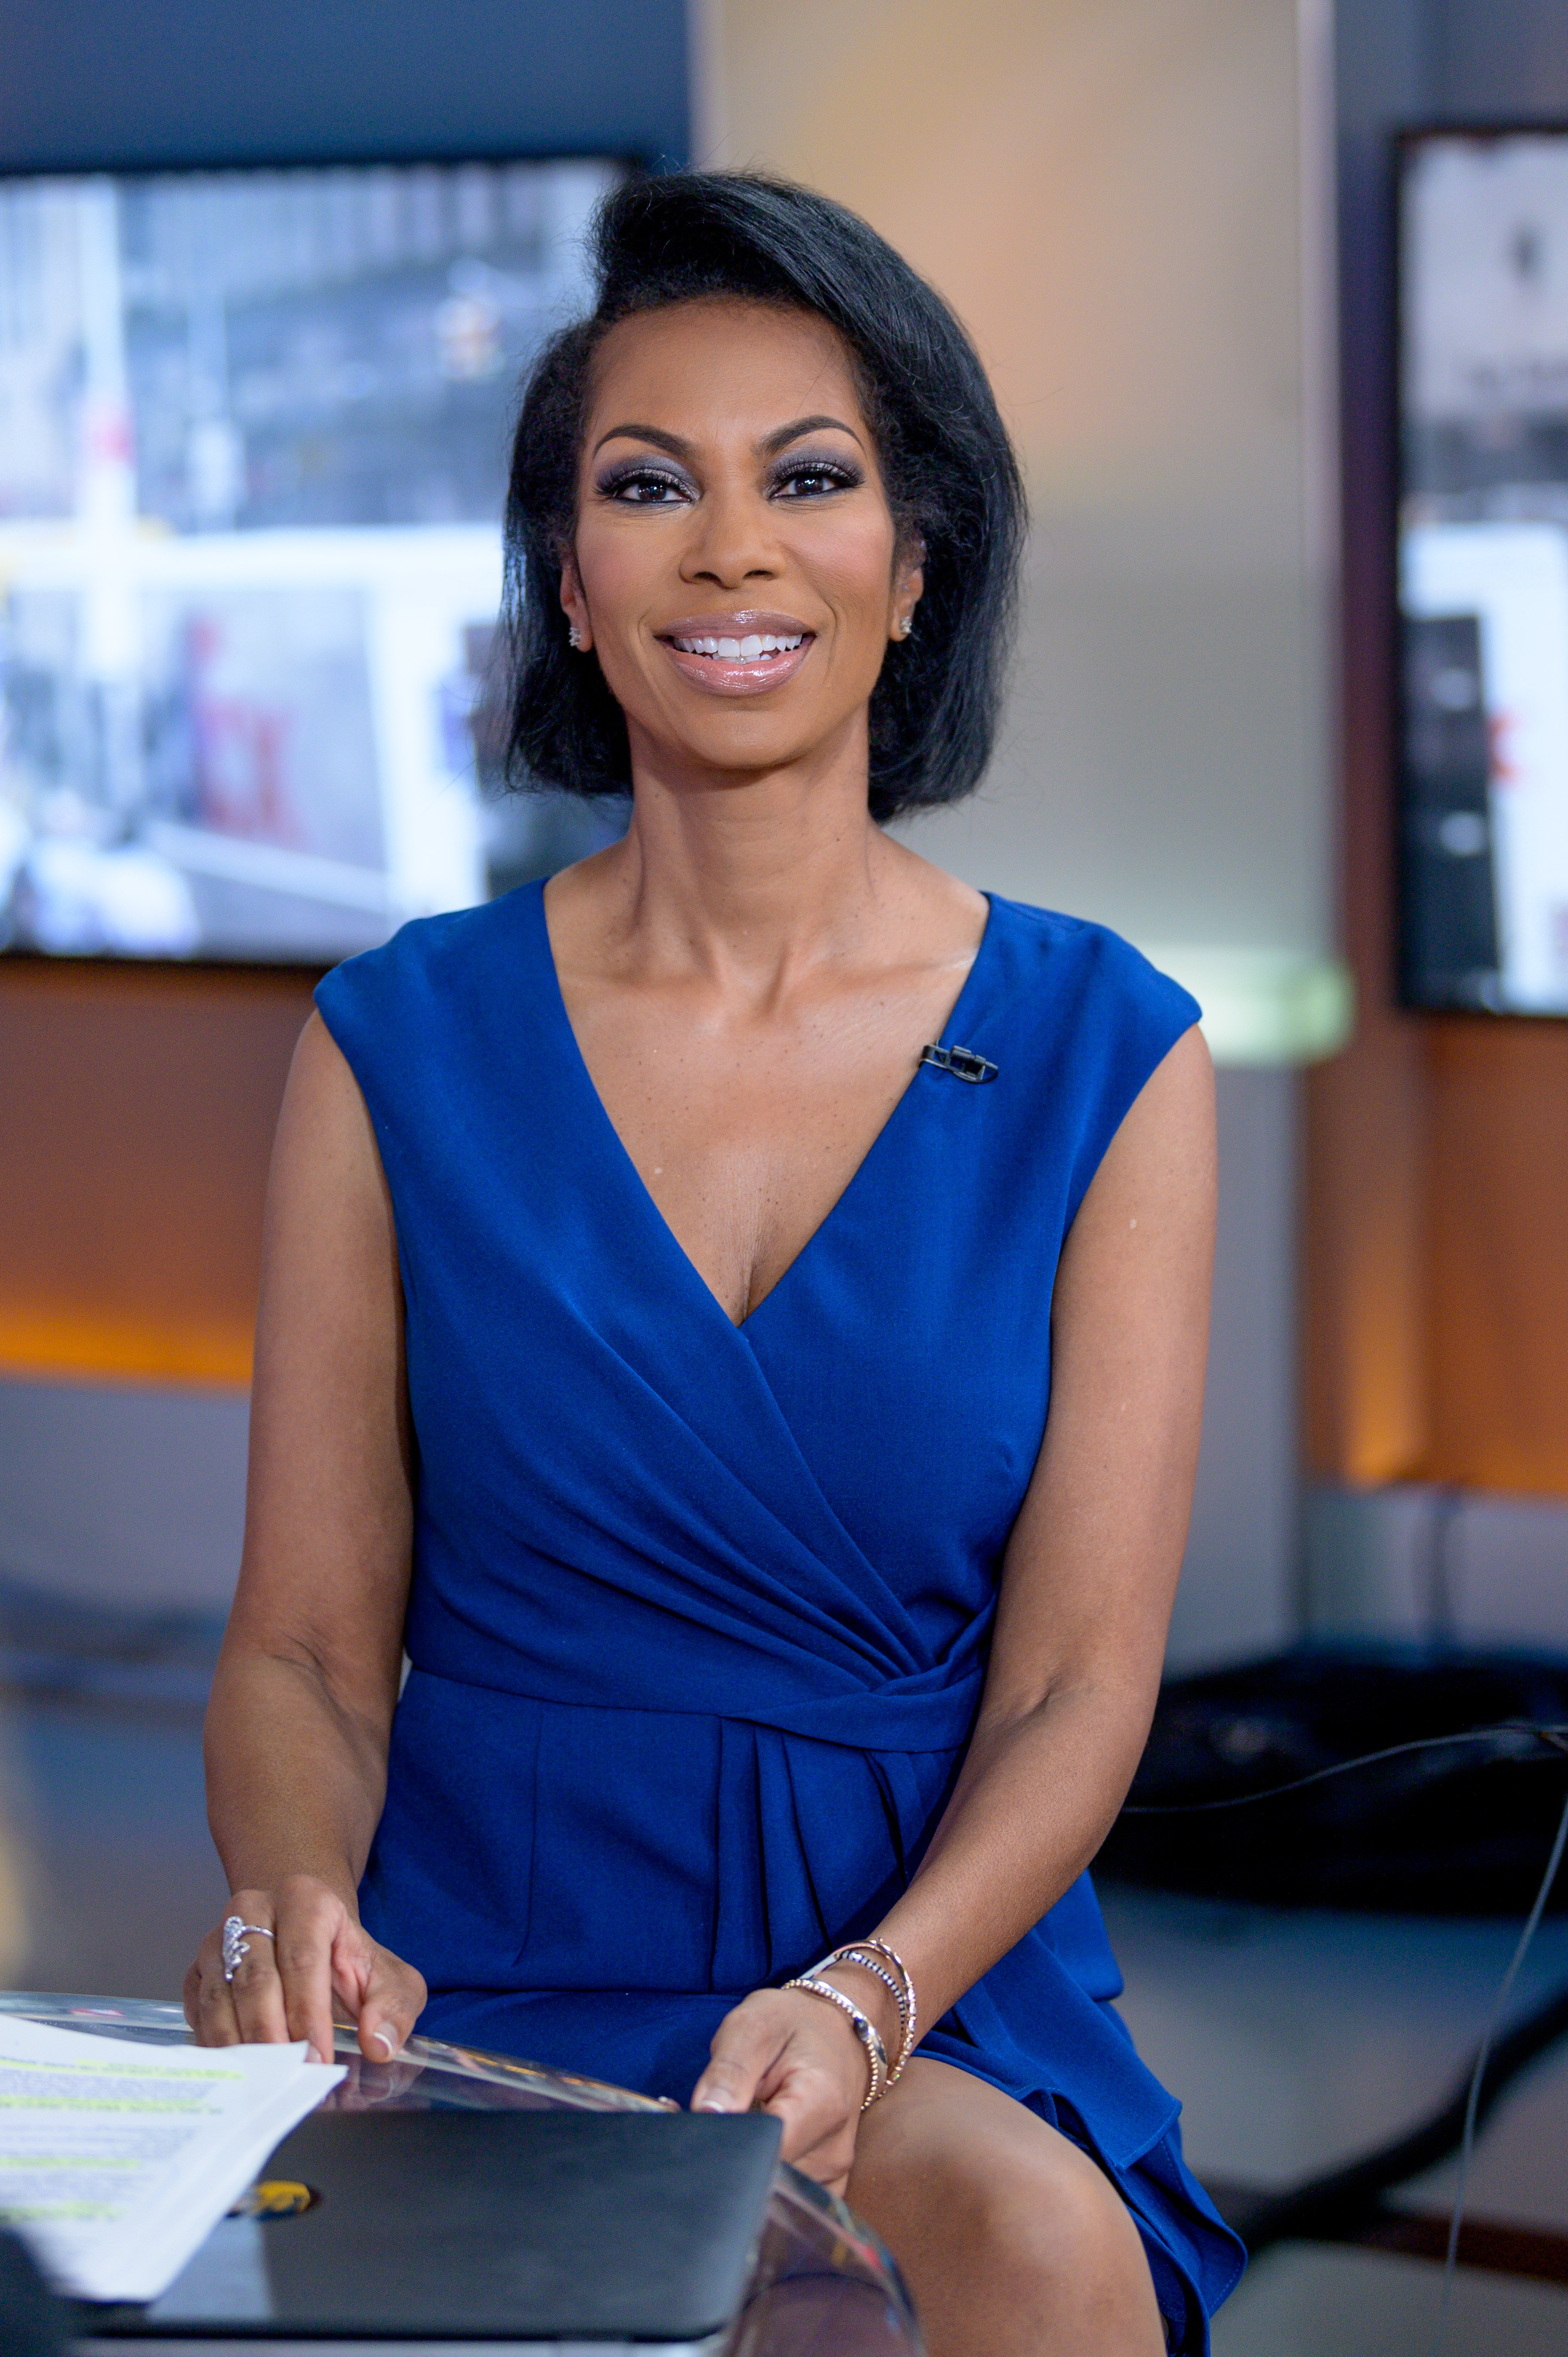 Harris Faulkner at the Fox News Channel Studio for "Outnumbered Overtime" in New York City on September 18, 2019 | Photo: Getty Images